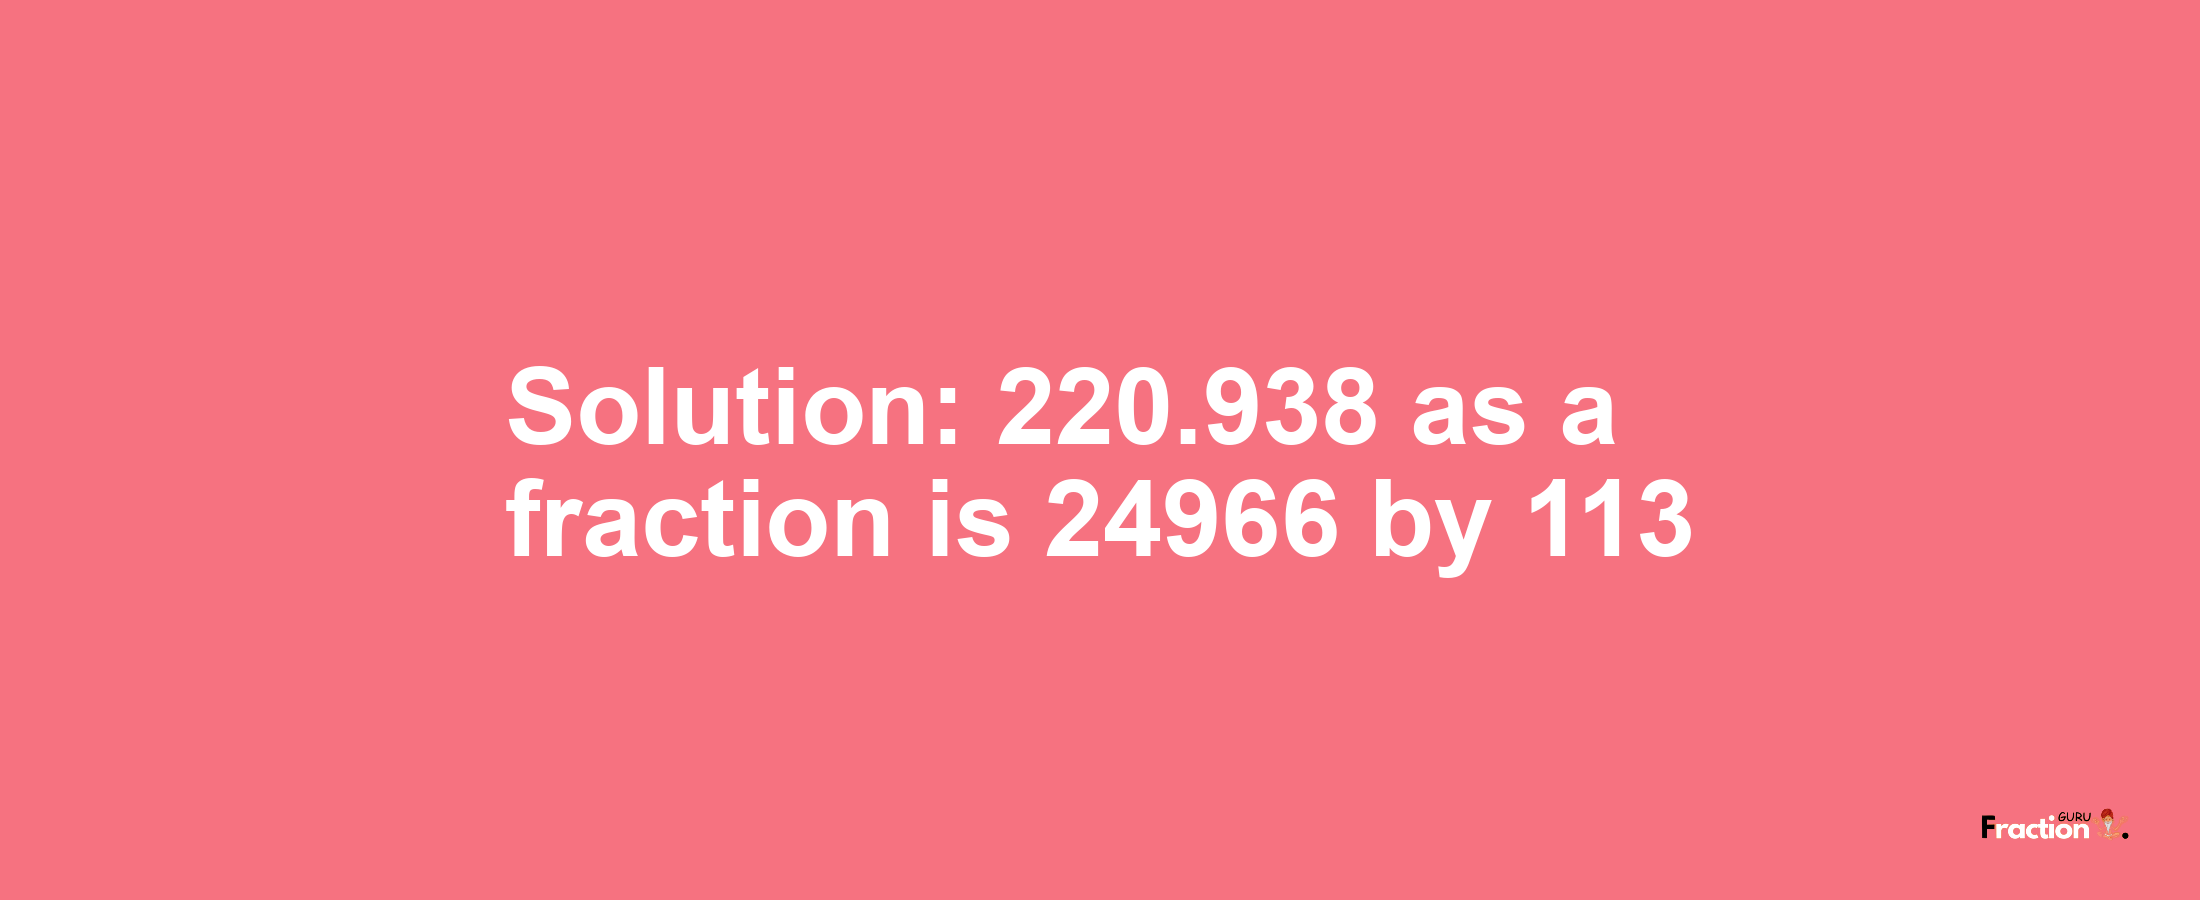 Solution:220.938 as a fraction is 24966/113